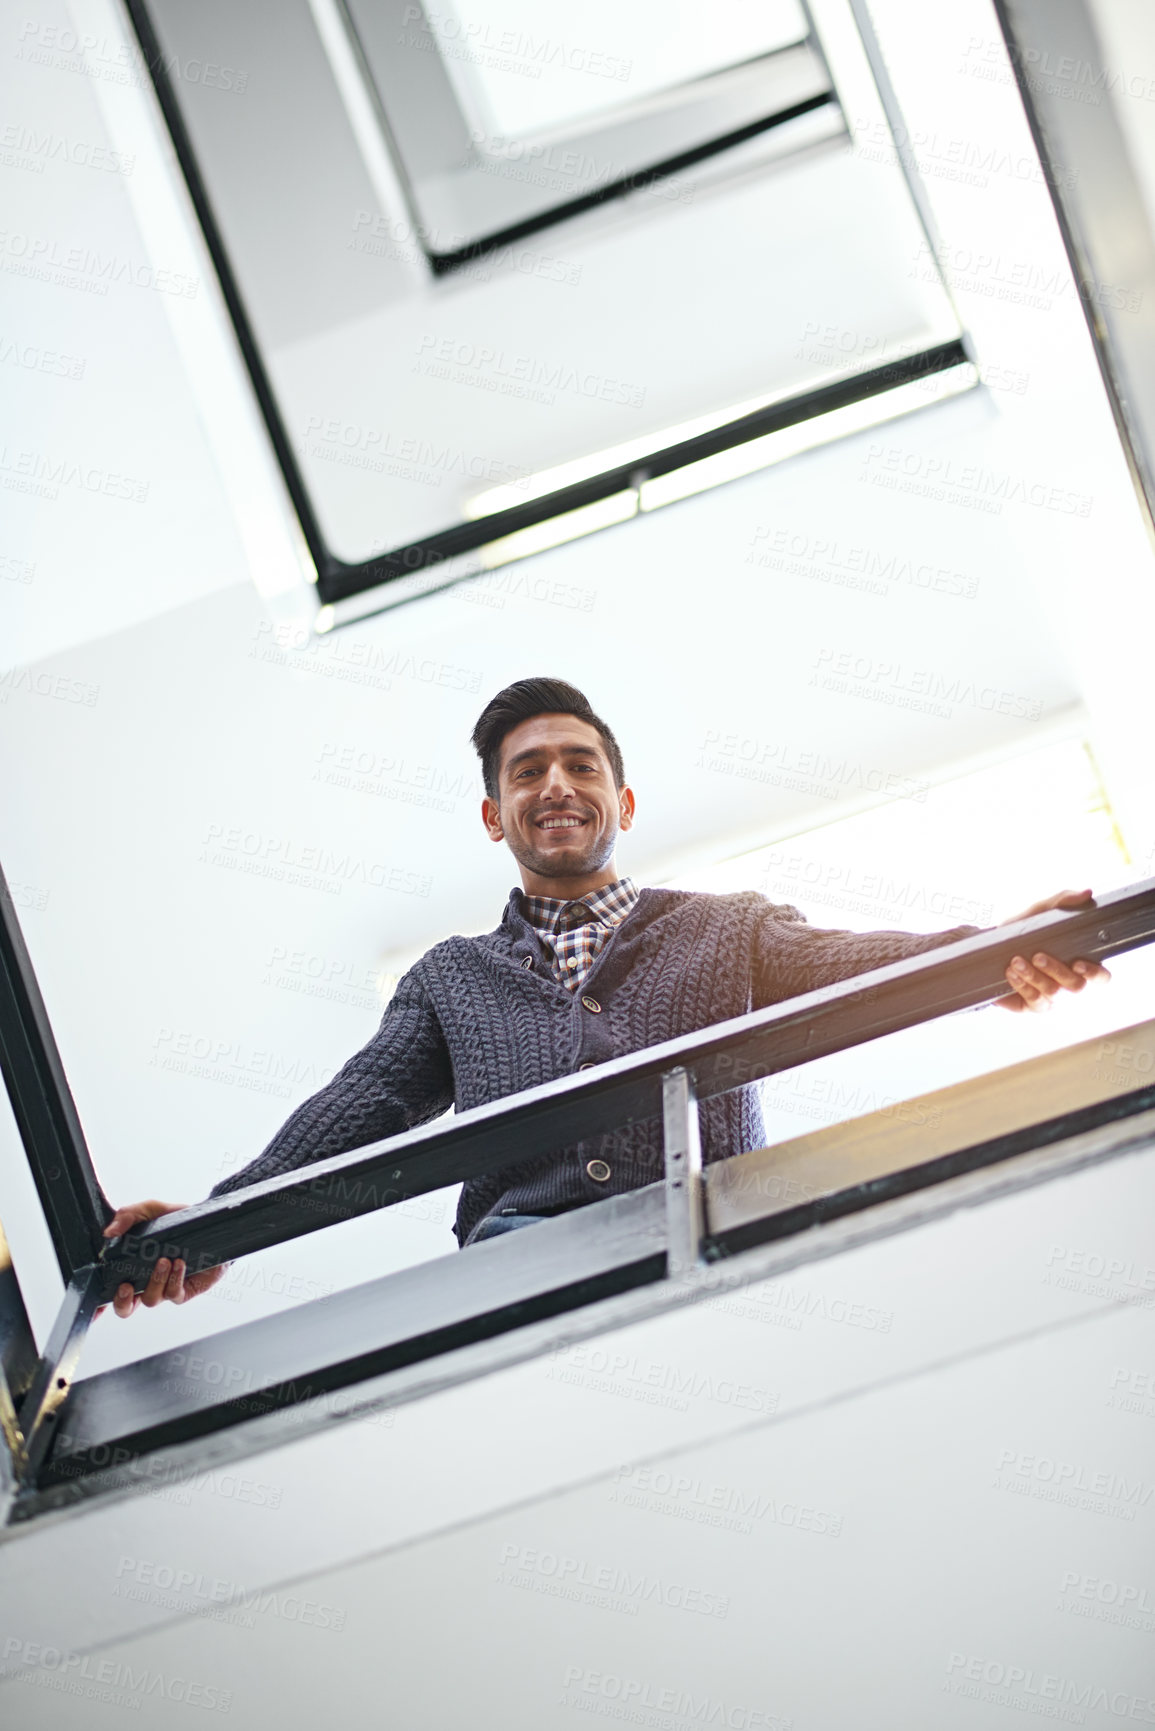 Buy stock photo Low angle portrait of a young businessman leaning on a stairwell bannister